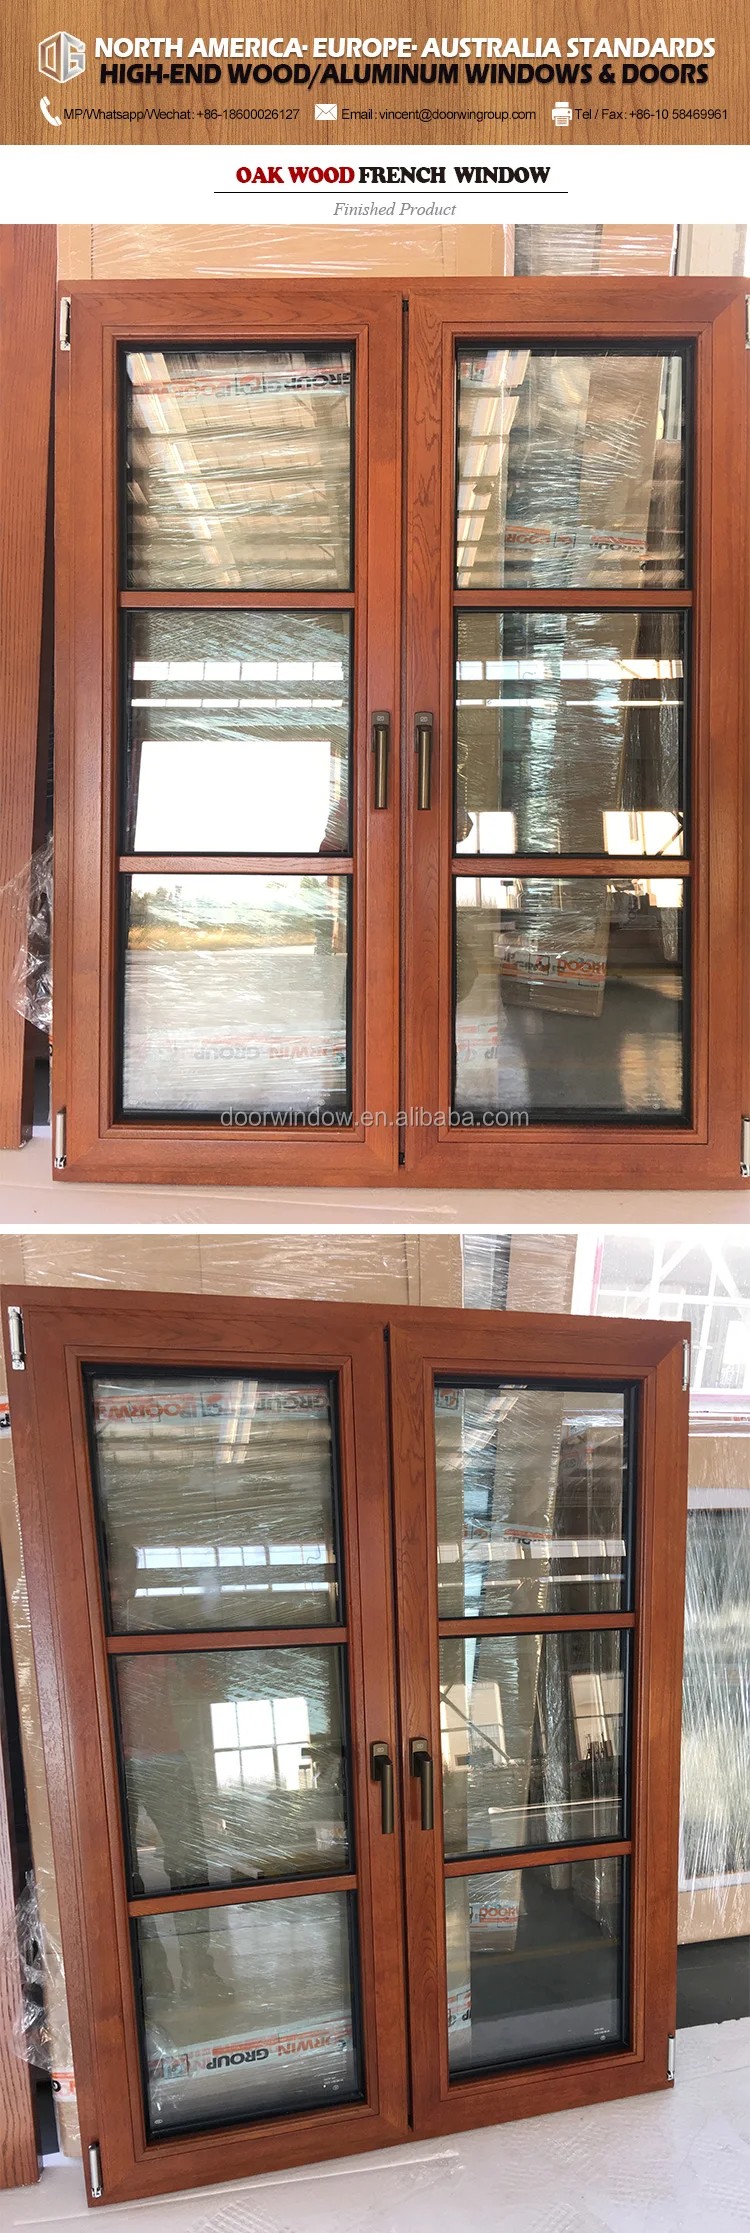 Good quality factory directly window grid removal diamond grille vintage 6 pane windows